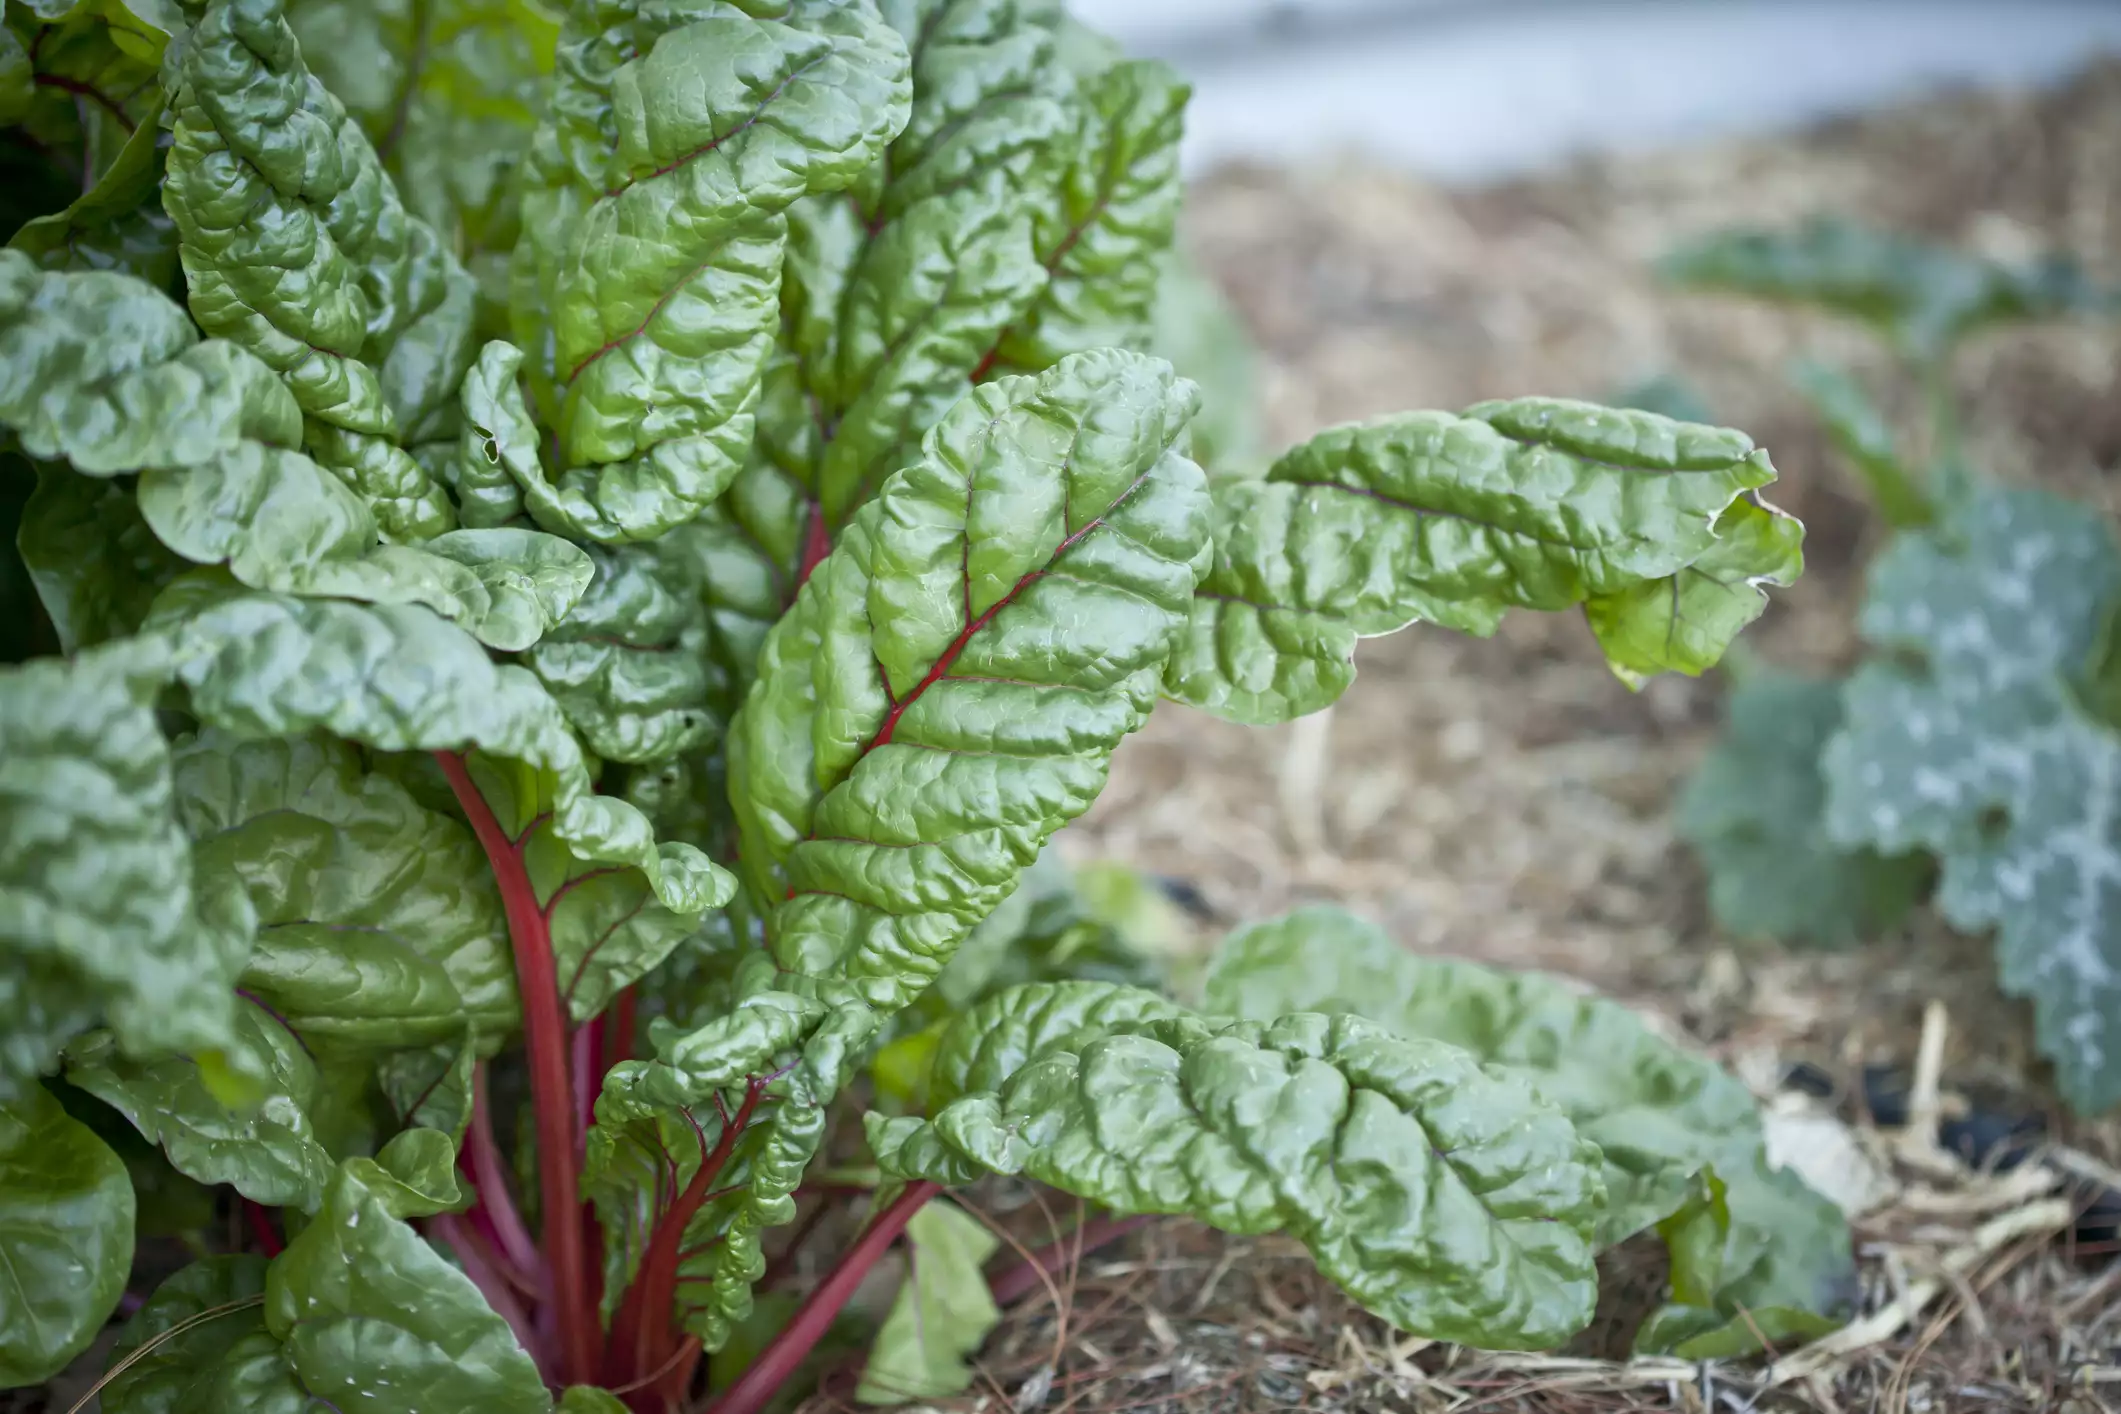 Red-ribbed chard with crinkled leaves growing in garden